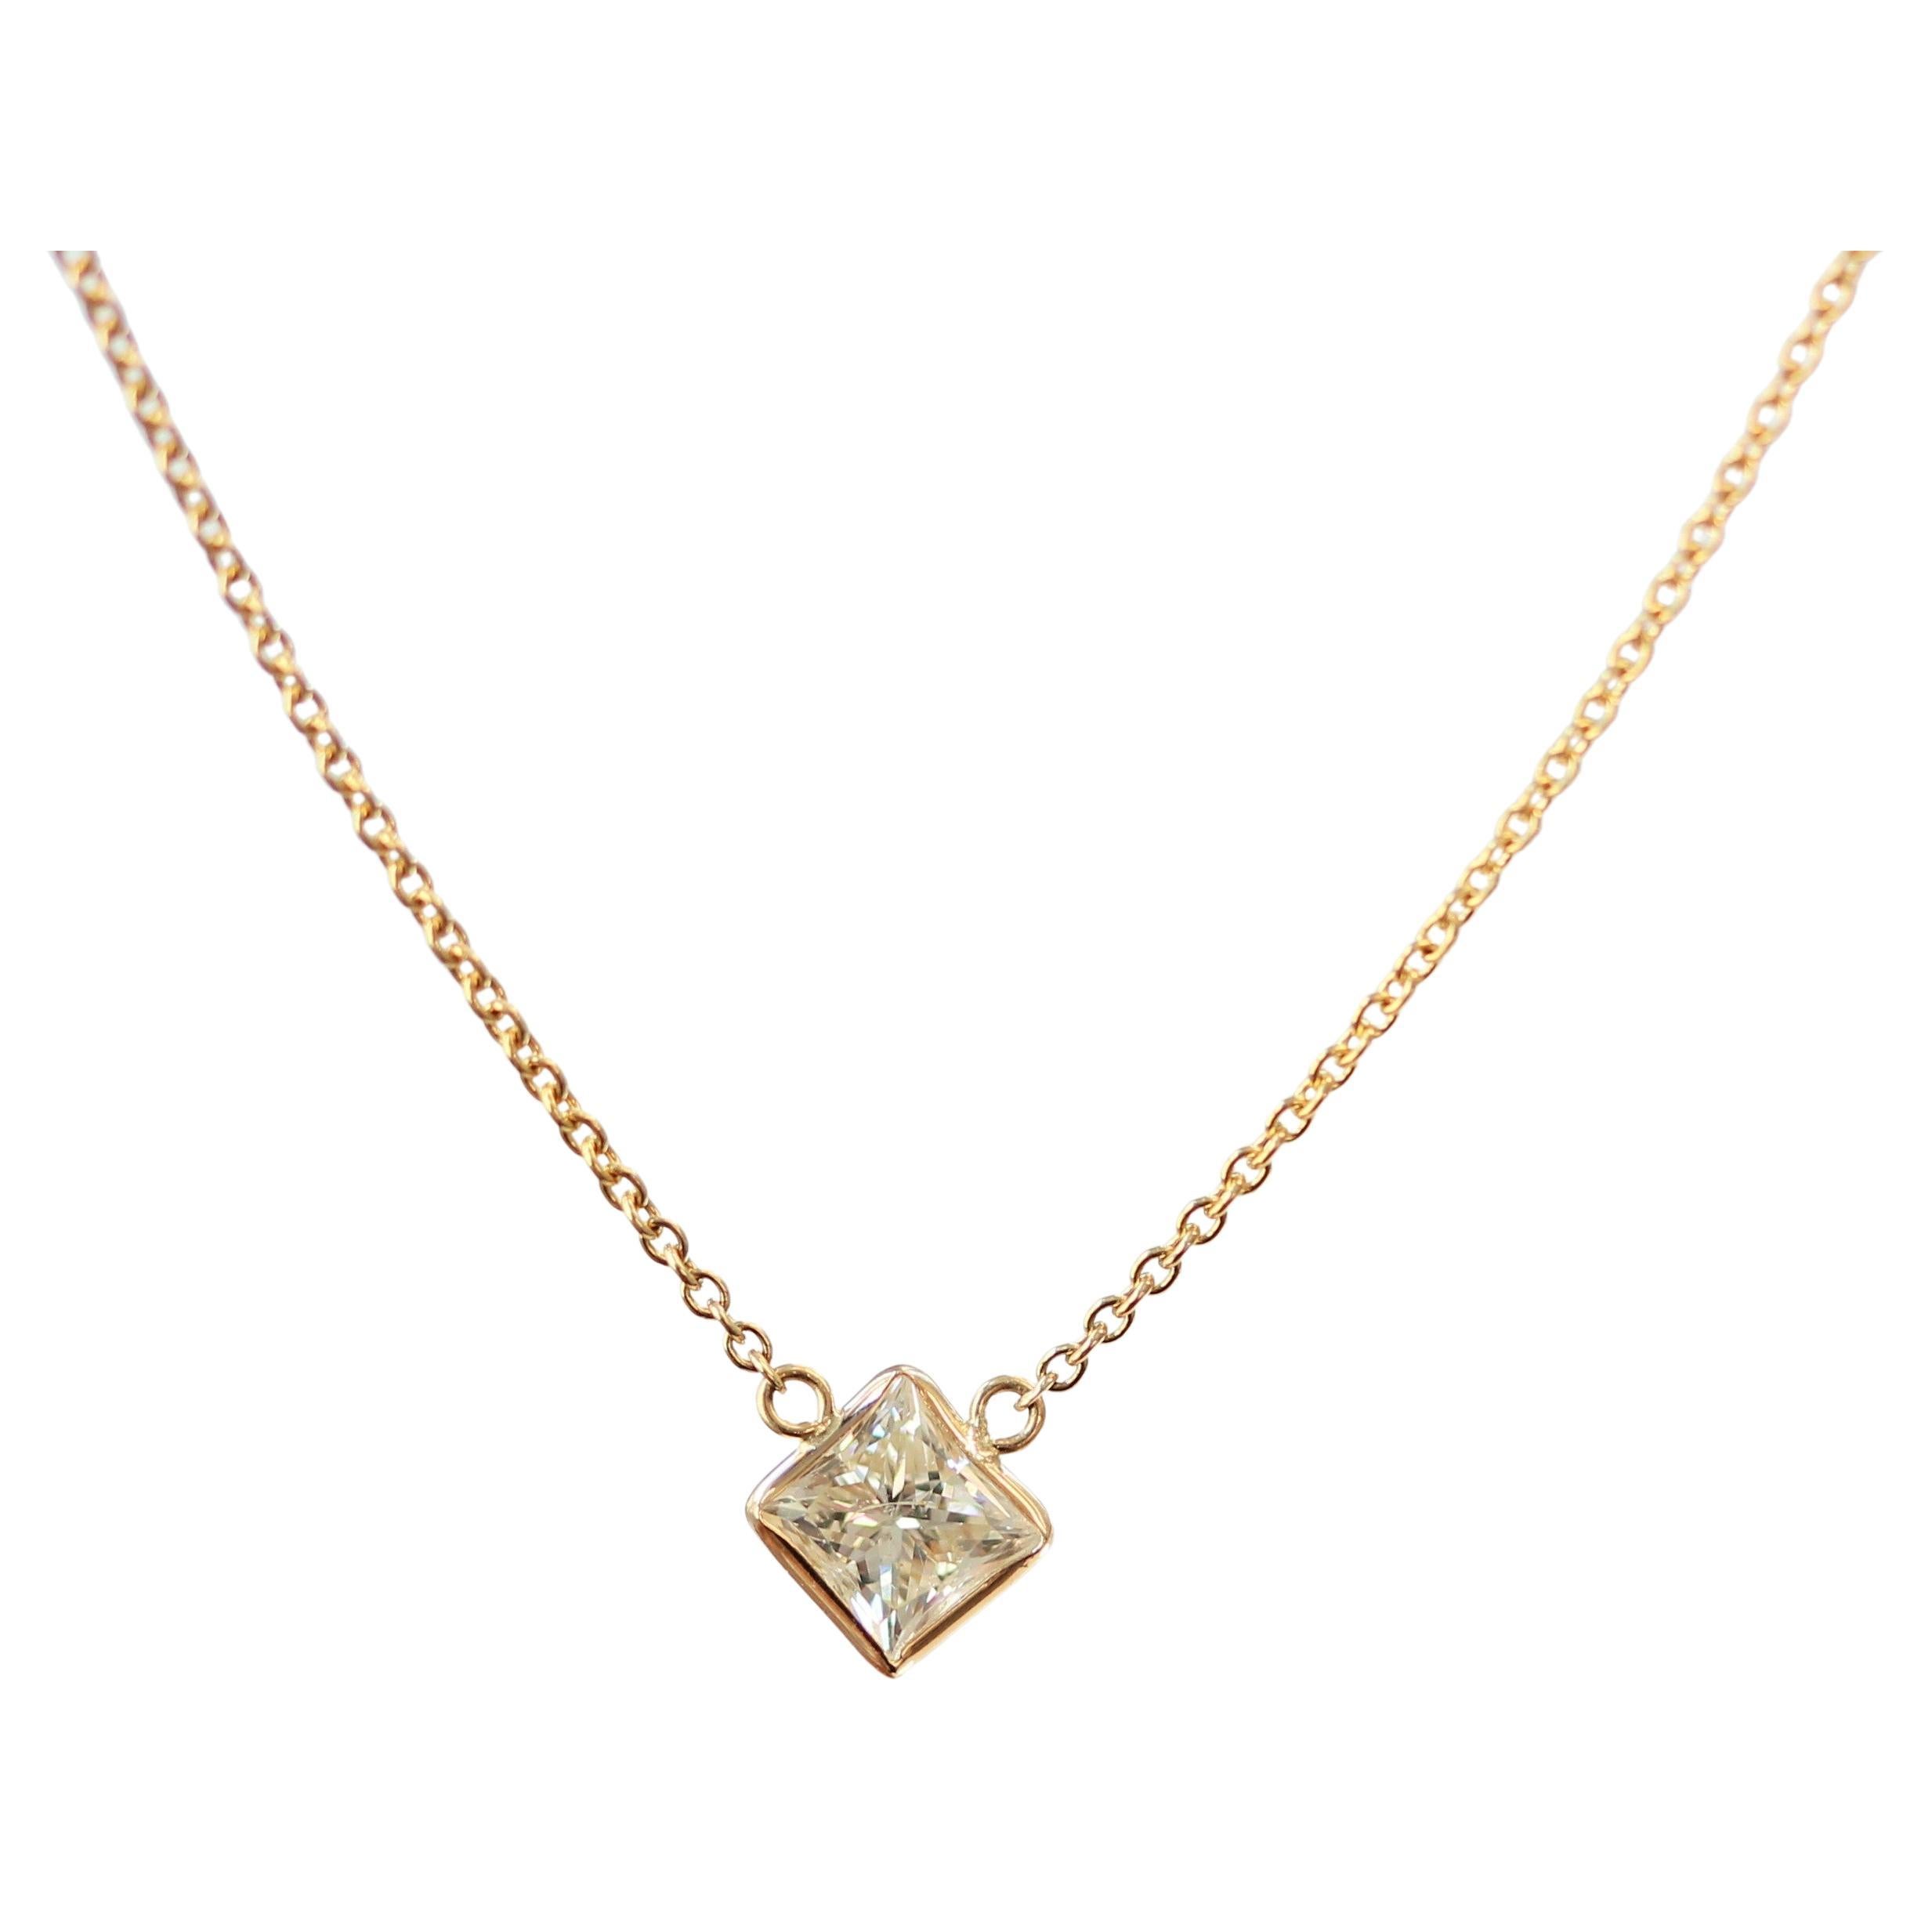 1.03 Ct Diamond Princess Delicate Handmade Solitaire Necklace In 14k Yellow Gold